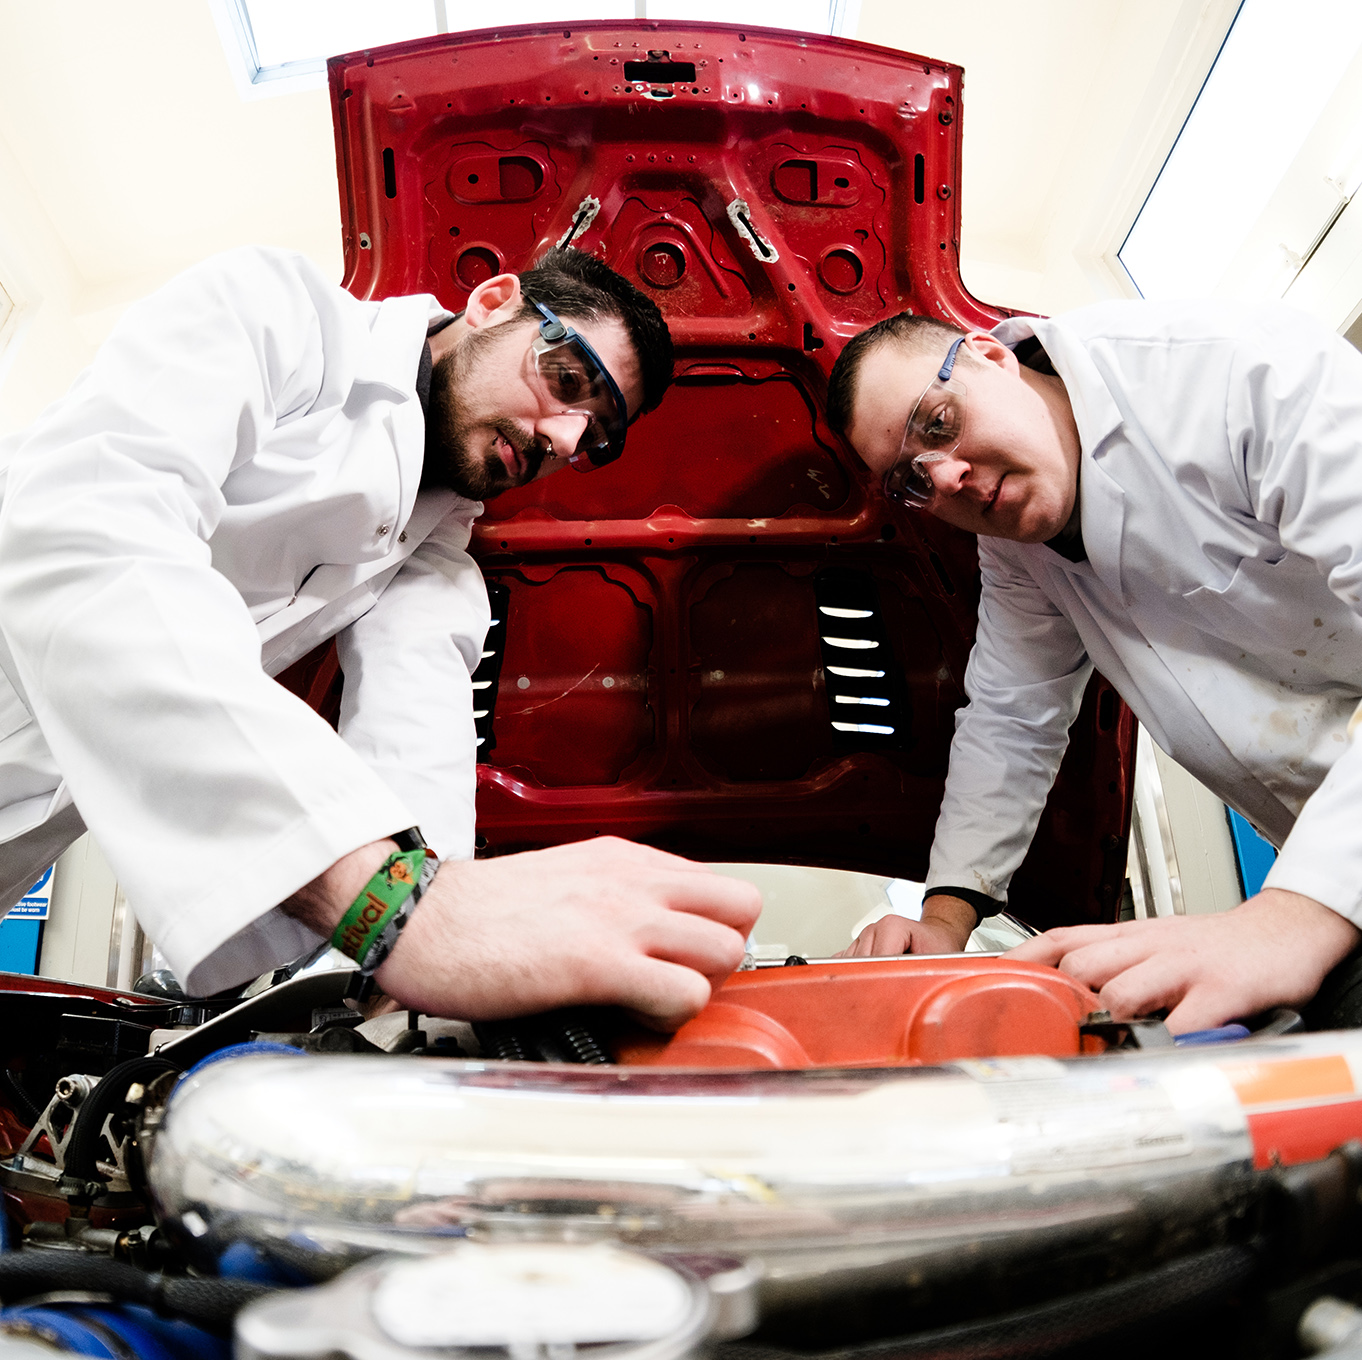 Two students wearing safety goggles working under the bonnet of a car